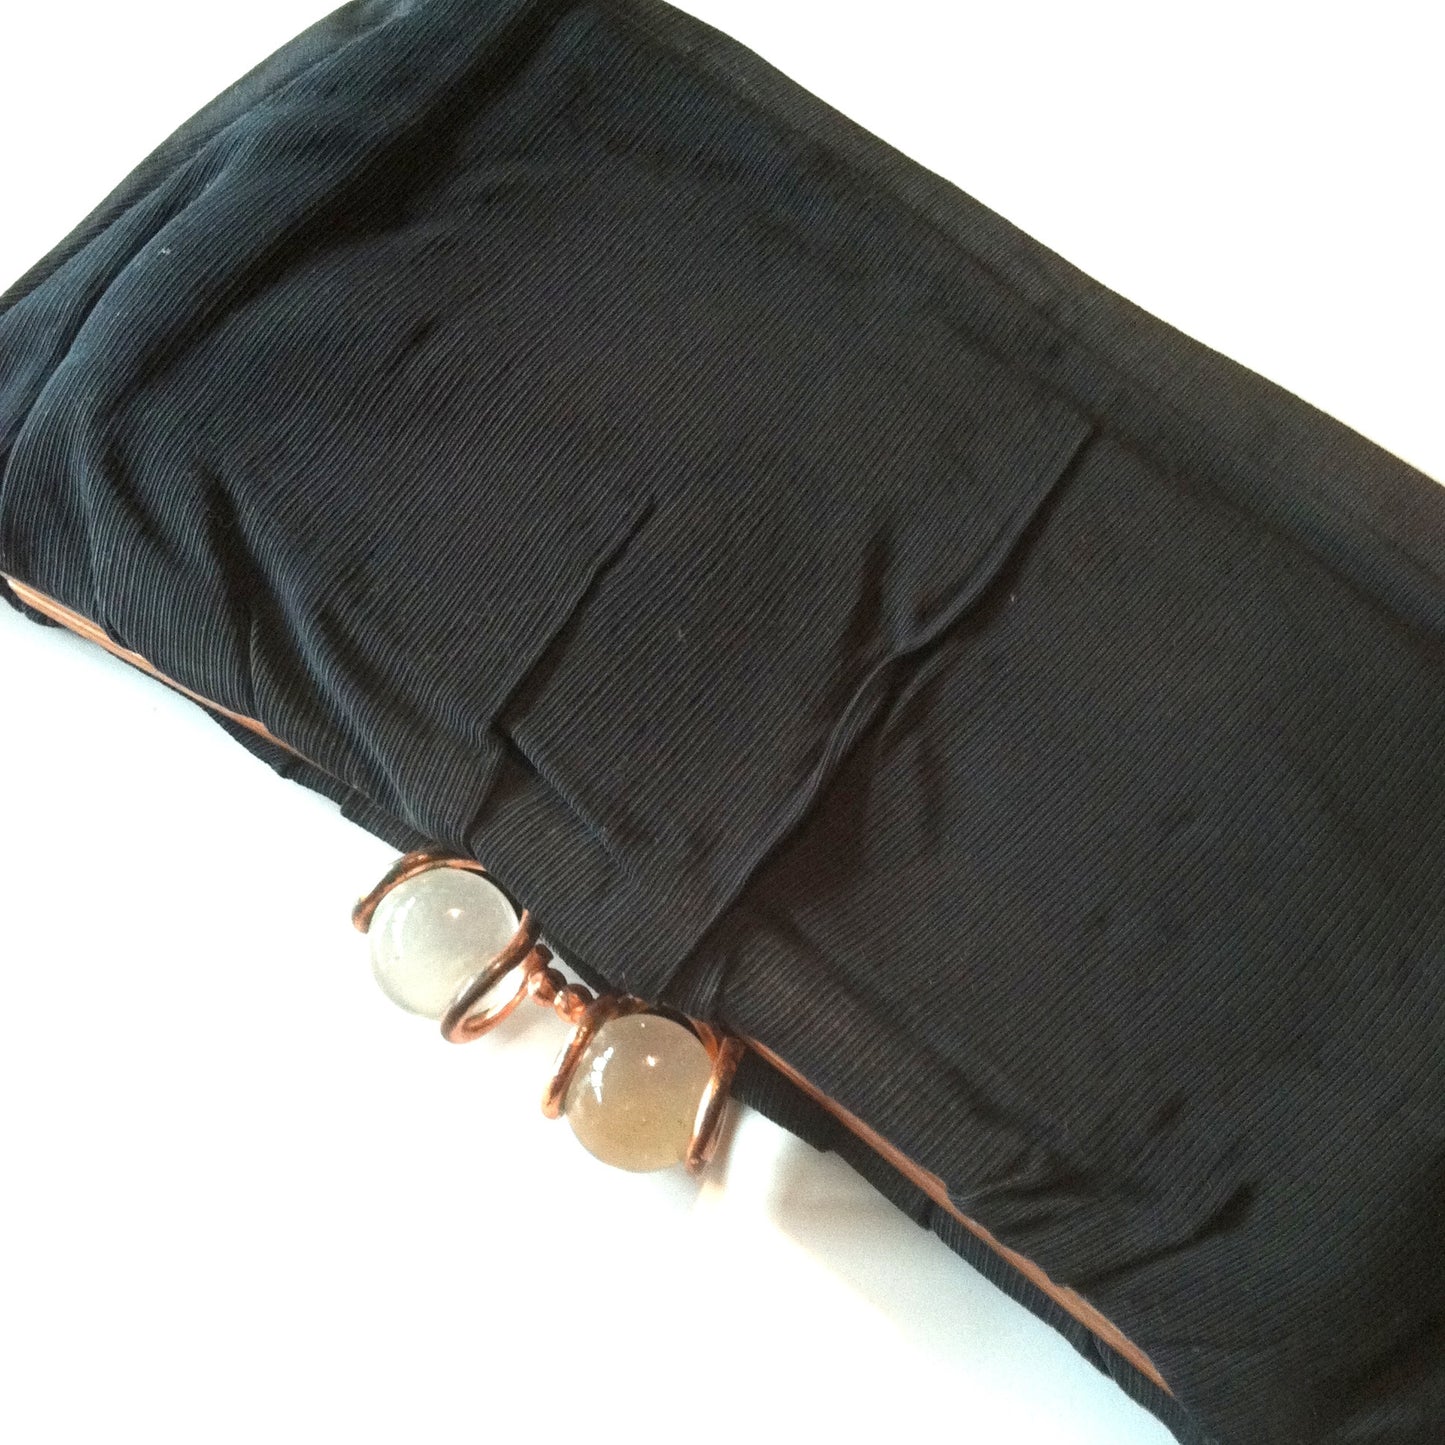 Copper and Lucite Framed Clutch Style Handbag circa 1940s